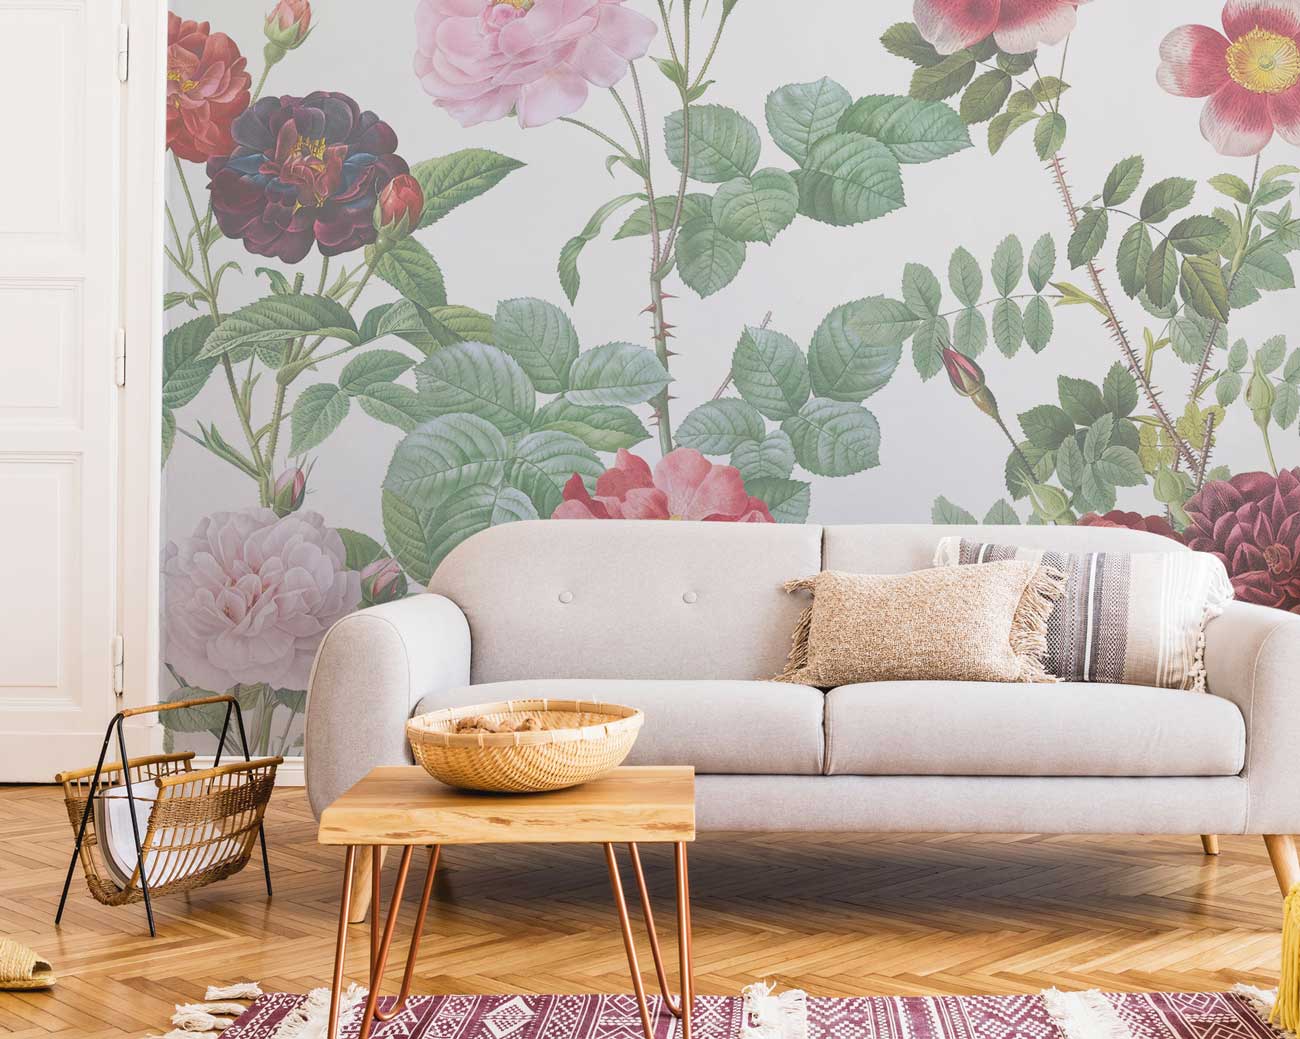 Rose Thorn Floral Wall Mural-Wall Mural-Eazywallz